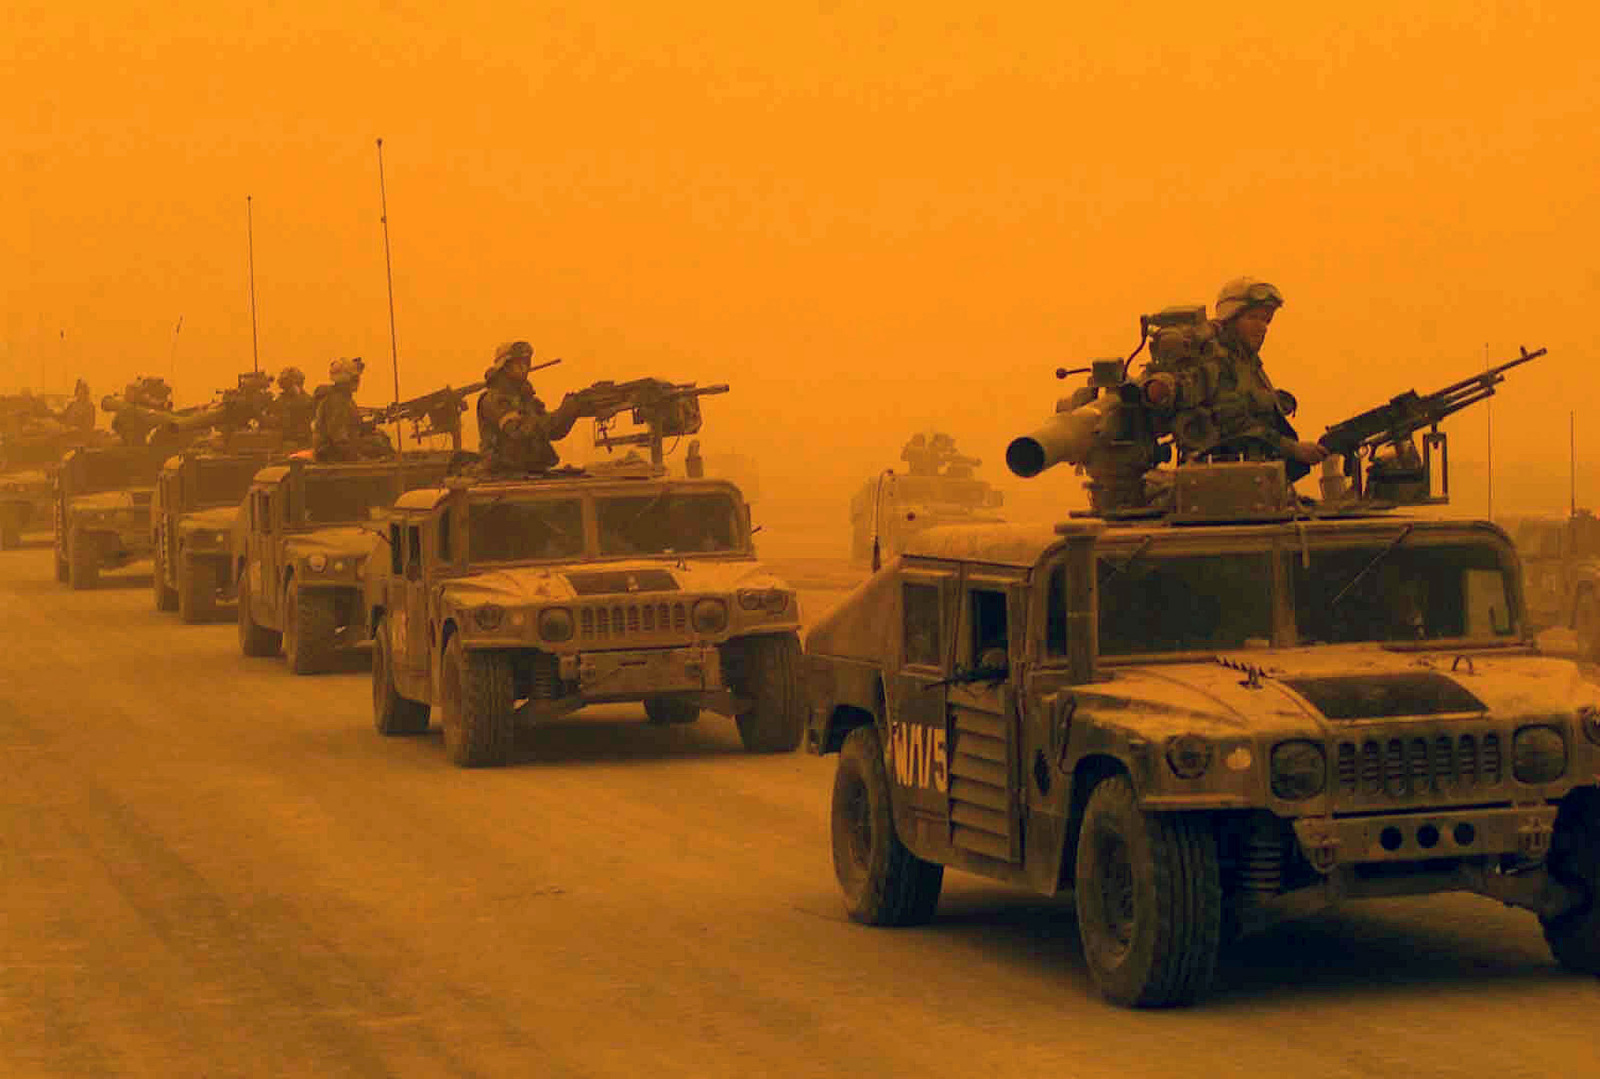 A convoy of US Marine Corps (USMC) High-Mobility Multipurpose Wheeled Vehicles (HMMVW), assigned to D/Company, 1ST Light Armored Reconnaissance Battalion, 1ST Marines Division, arrives in Northern Iraq, during a sandstorm. USMC personnel are in Iraq in support of Operation IRAQI FREEDOM. Several vehicles are equipped with Tube-launched Optically-tracked Wire-guided (TOW) missile launchers